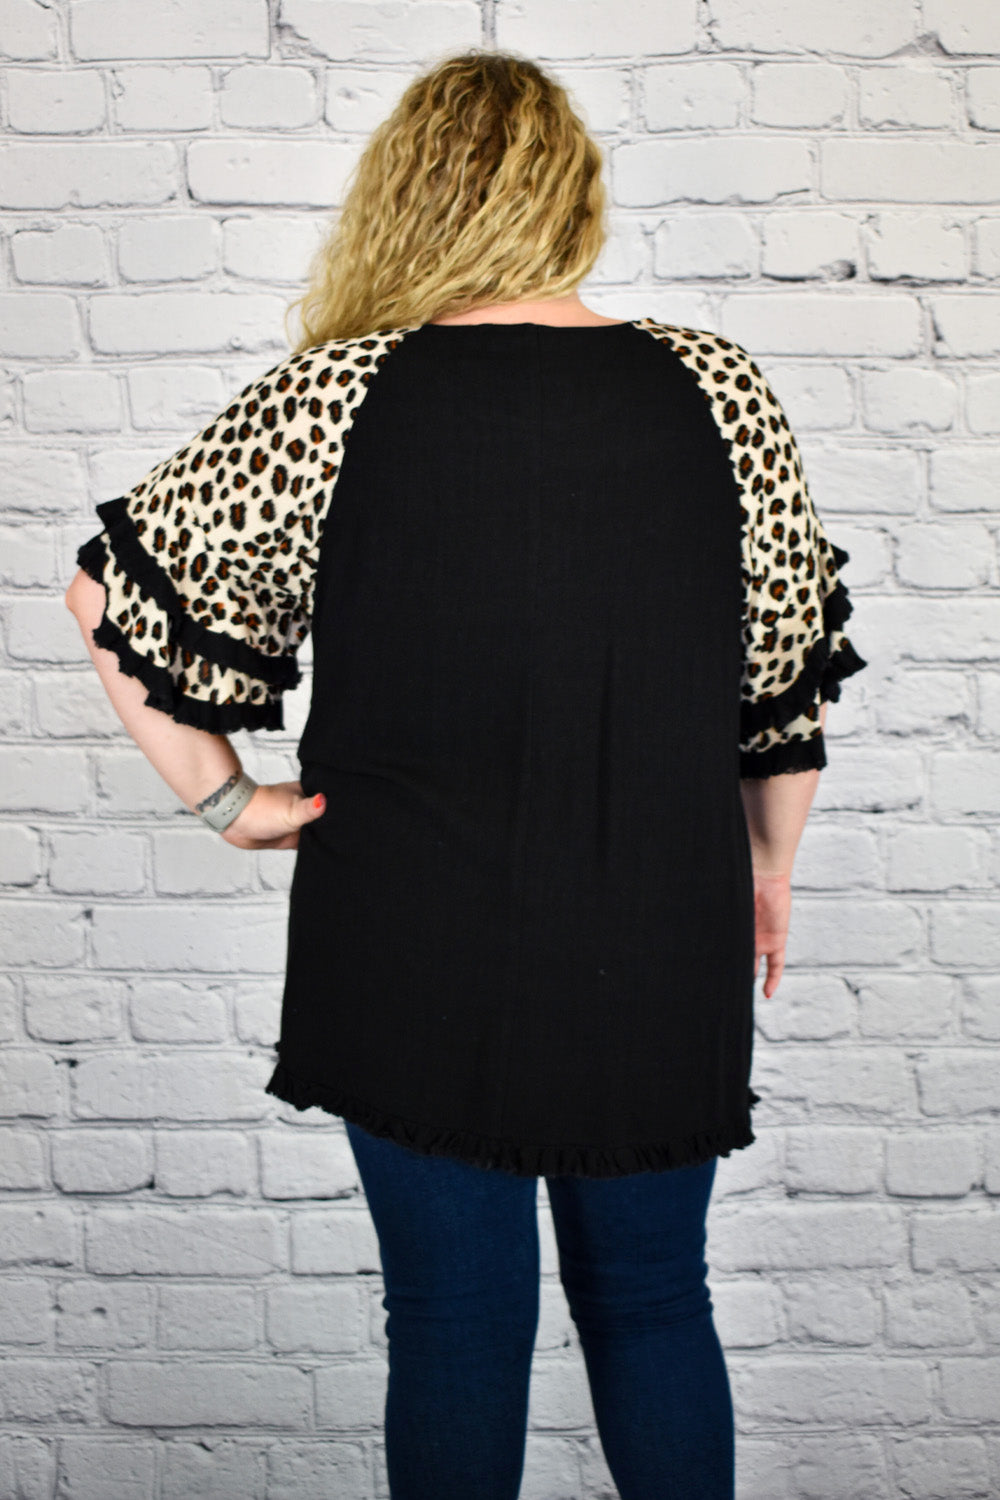 Linen Tunic Top with Animal Print Layered Bell Sleeves in Plus Size by Umgee Clothing